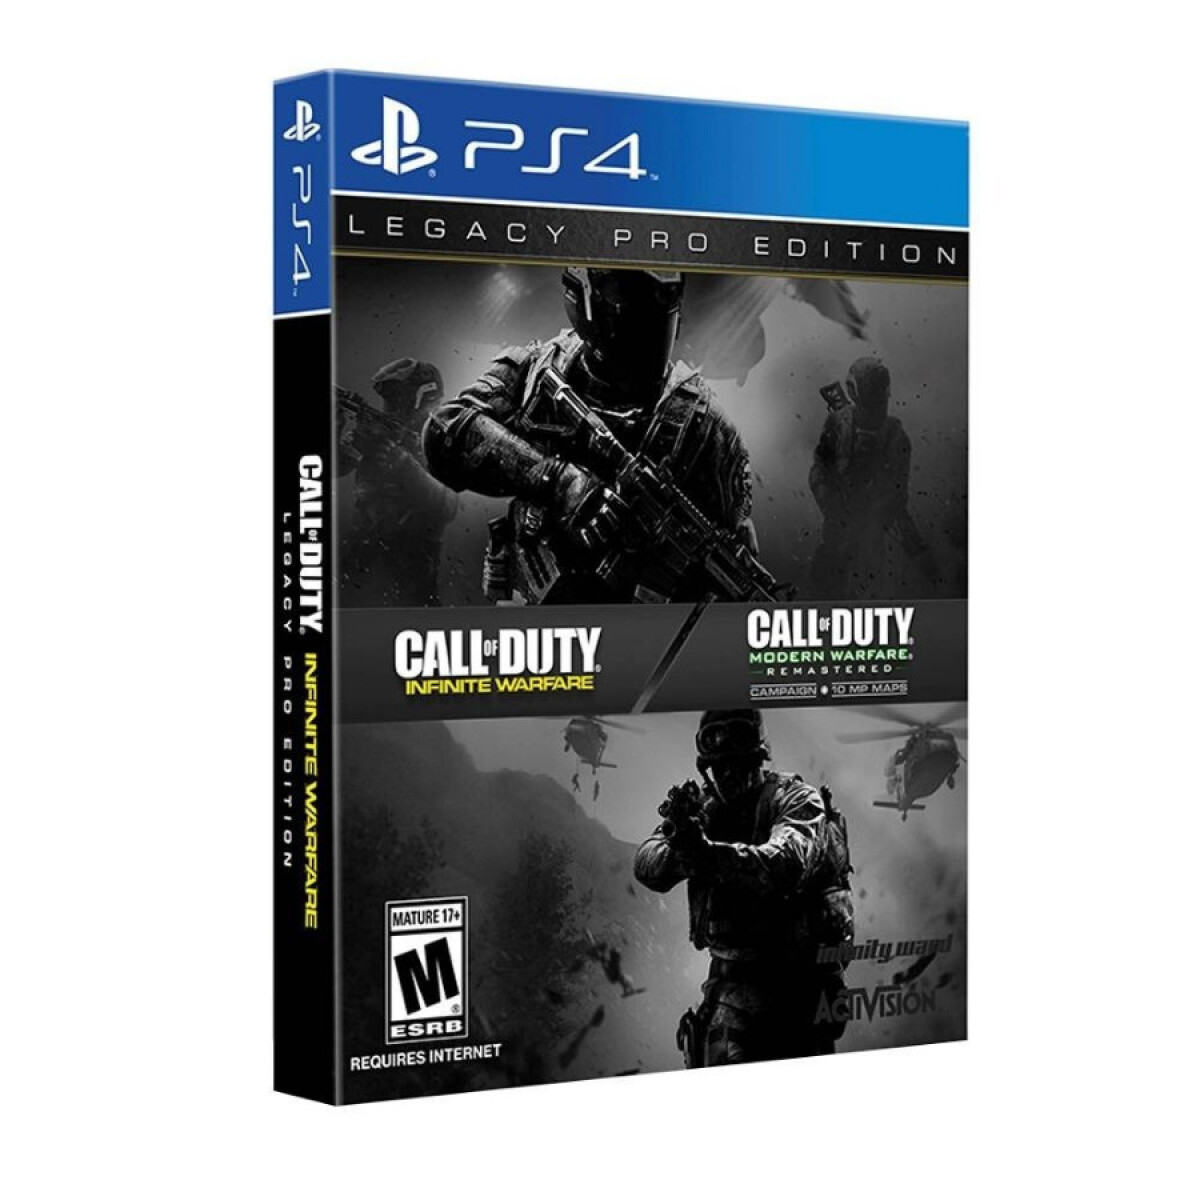 Call of Duty Legacy [Pro Edition Steelbook] 